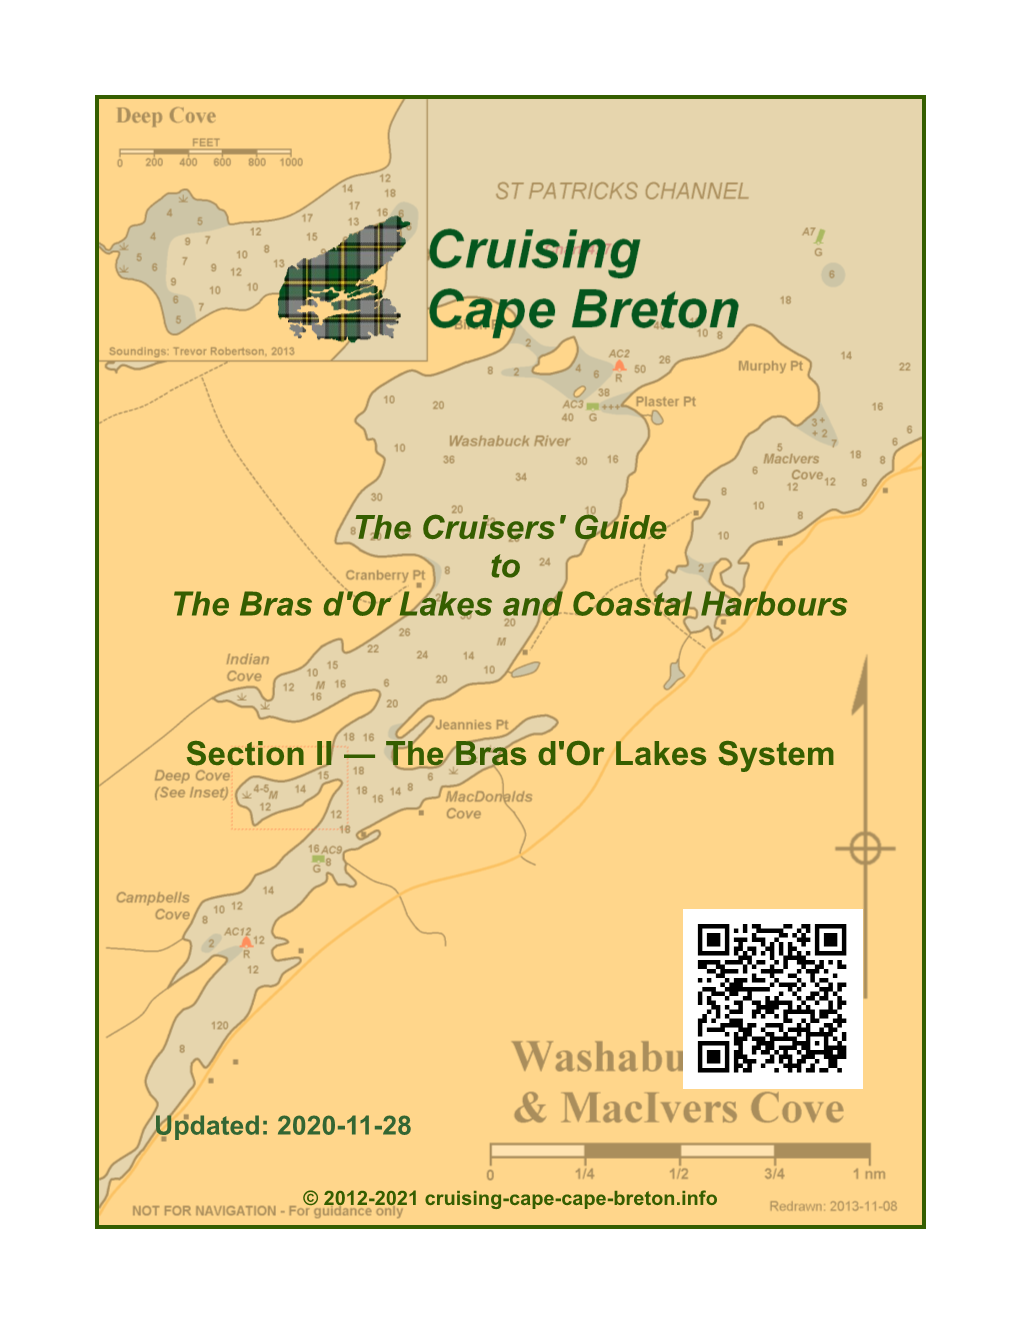 The Cruisers' Guide to the Bras D'or Lakes and Coastal Harbours